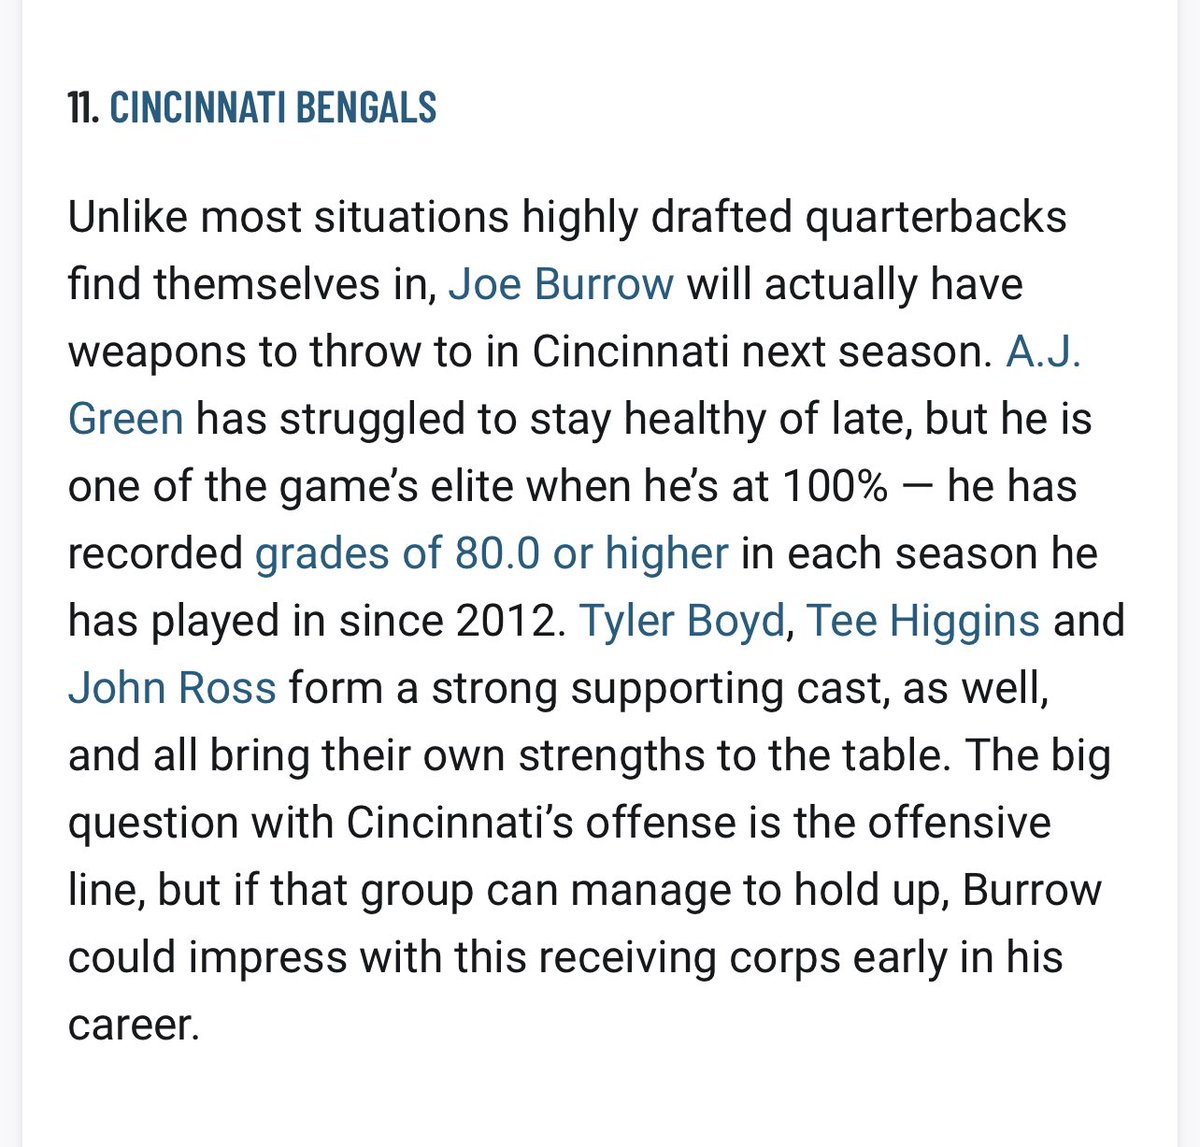 Heading into the 2020 season, the Bengals already had a very good WR corps. @PFF ranked it #11 in the NFL. So what did they do in the draft? They took Ja’Marr Chase. 

Playmakers at WR. You can’t win without them. The #Browns need to heed this lesson. https://t.co/BHQKB65lng